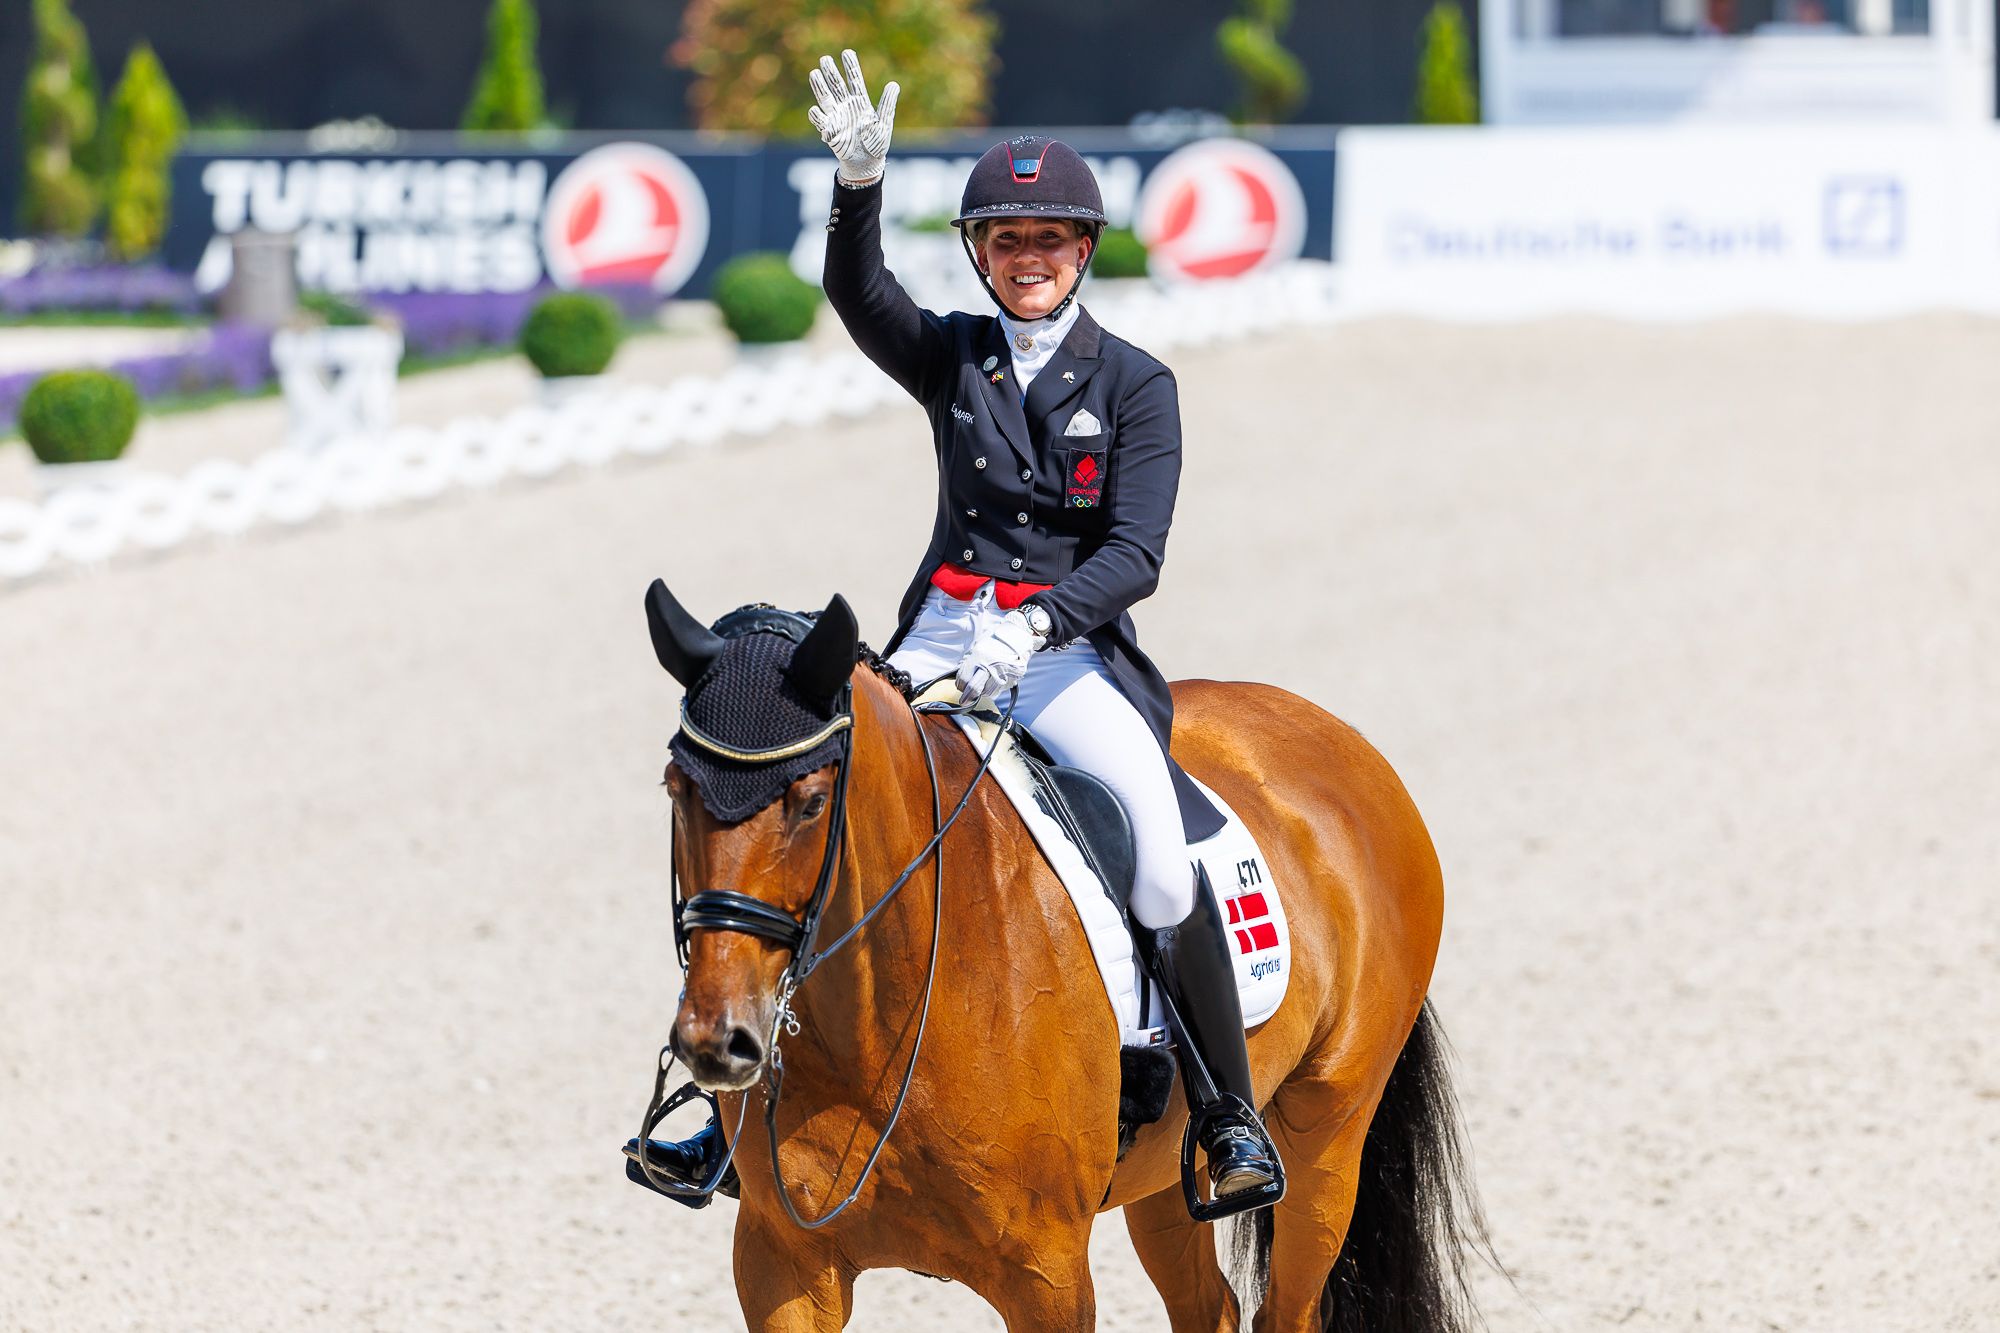 Convincing win for Cathrine Dufour in Aachen Grand Prix